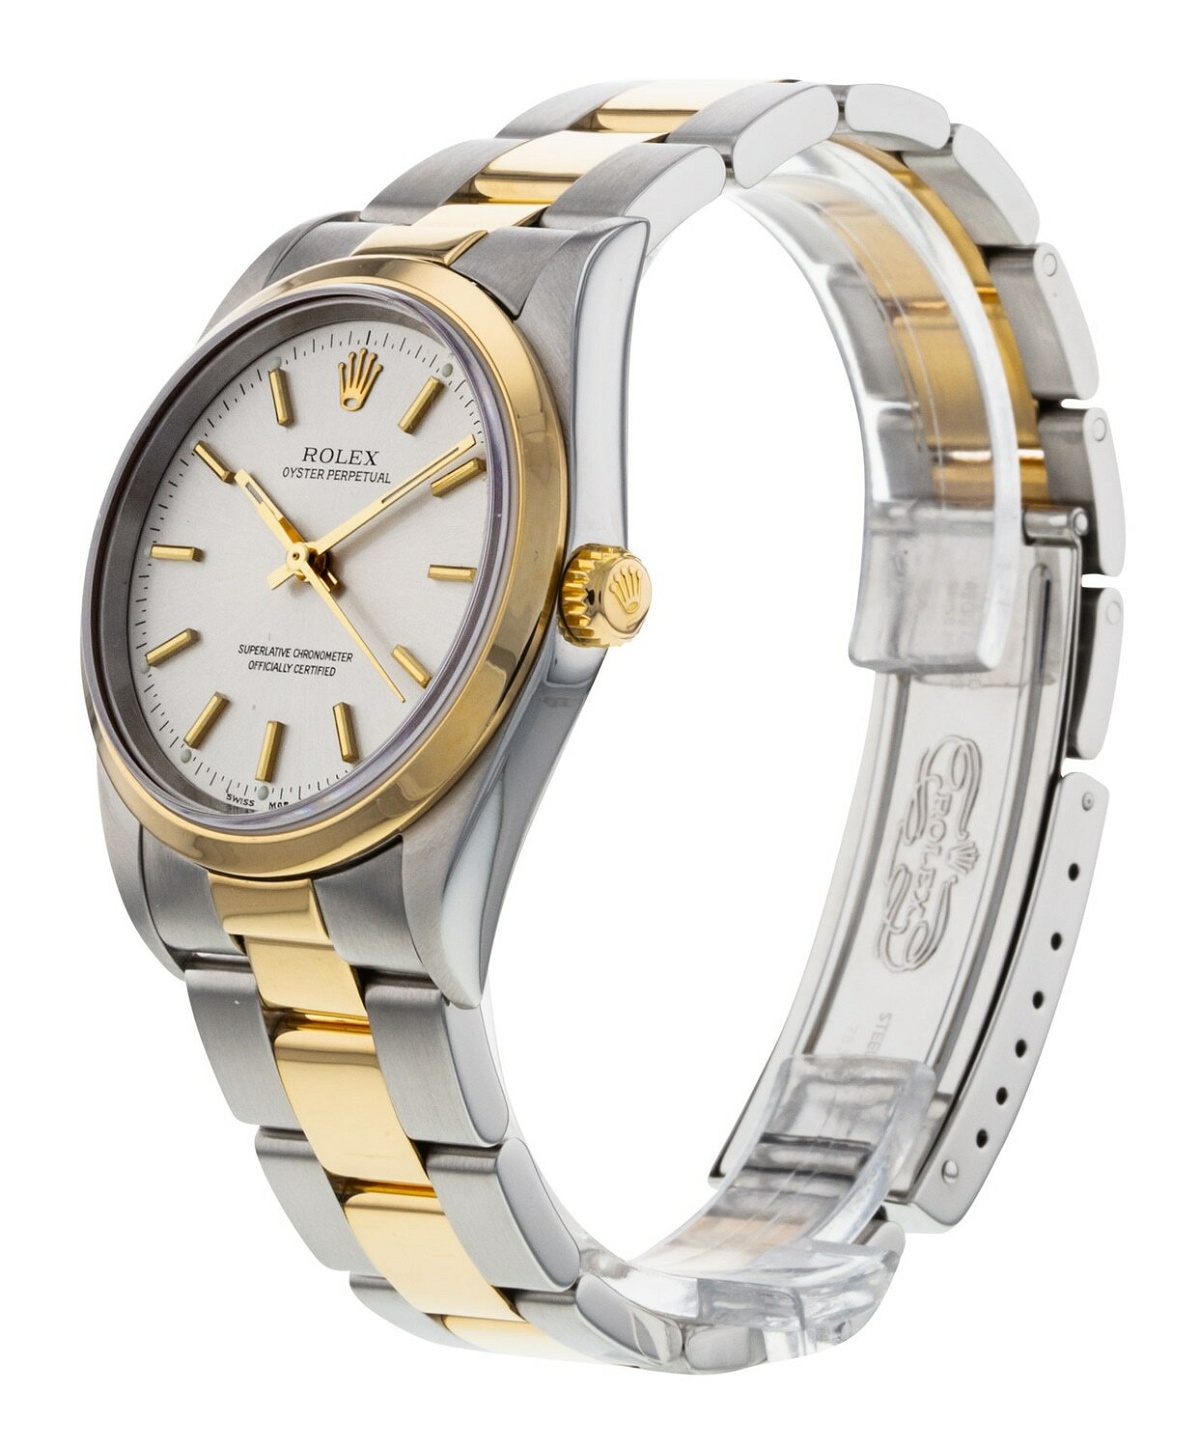 Rolex Oyster Perpetual 14203M